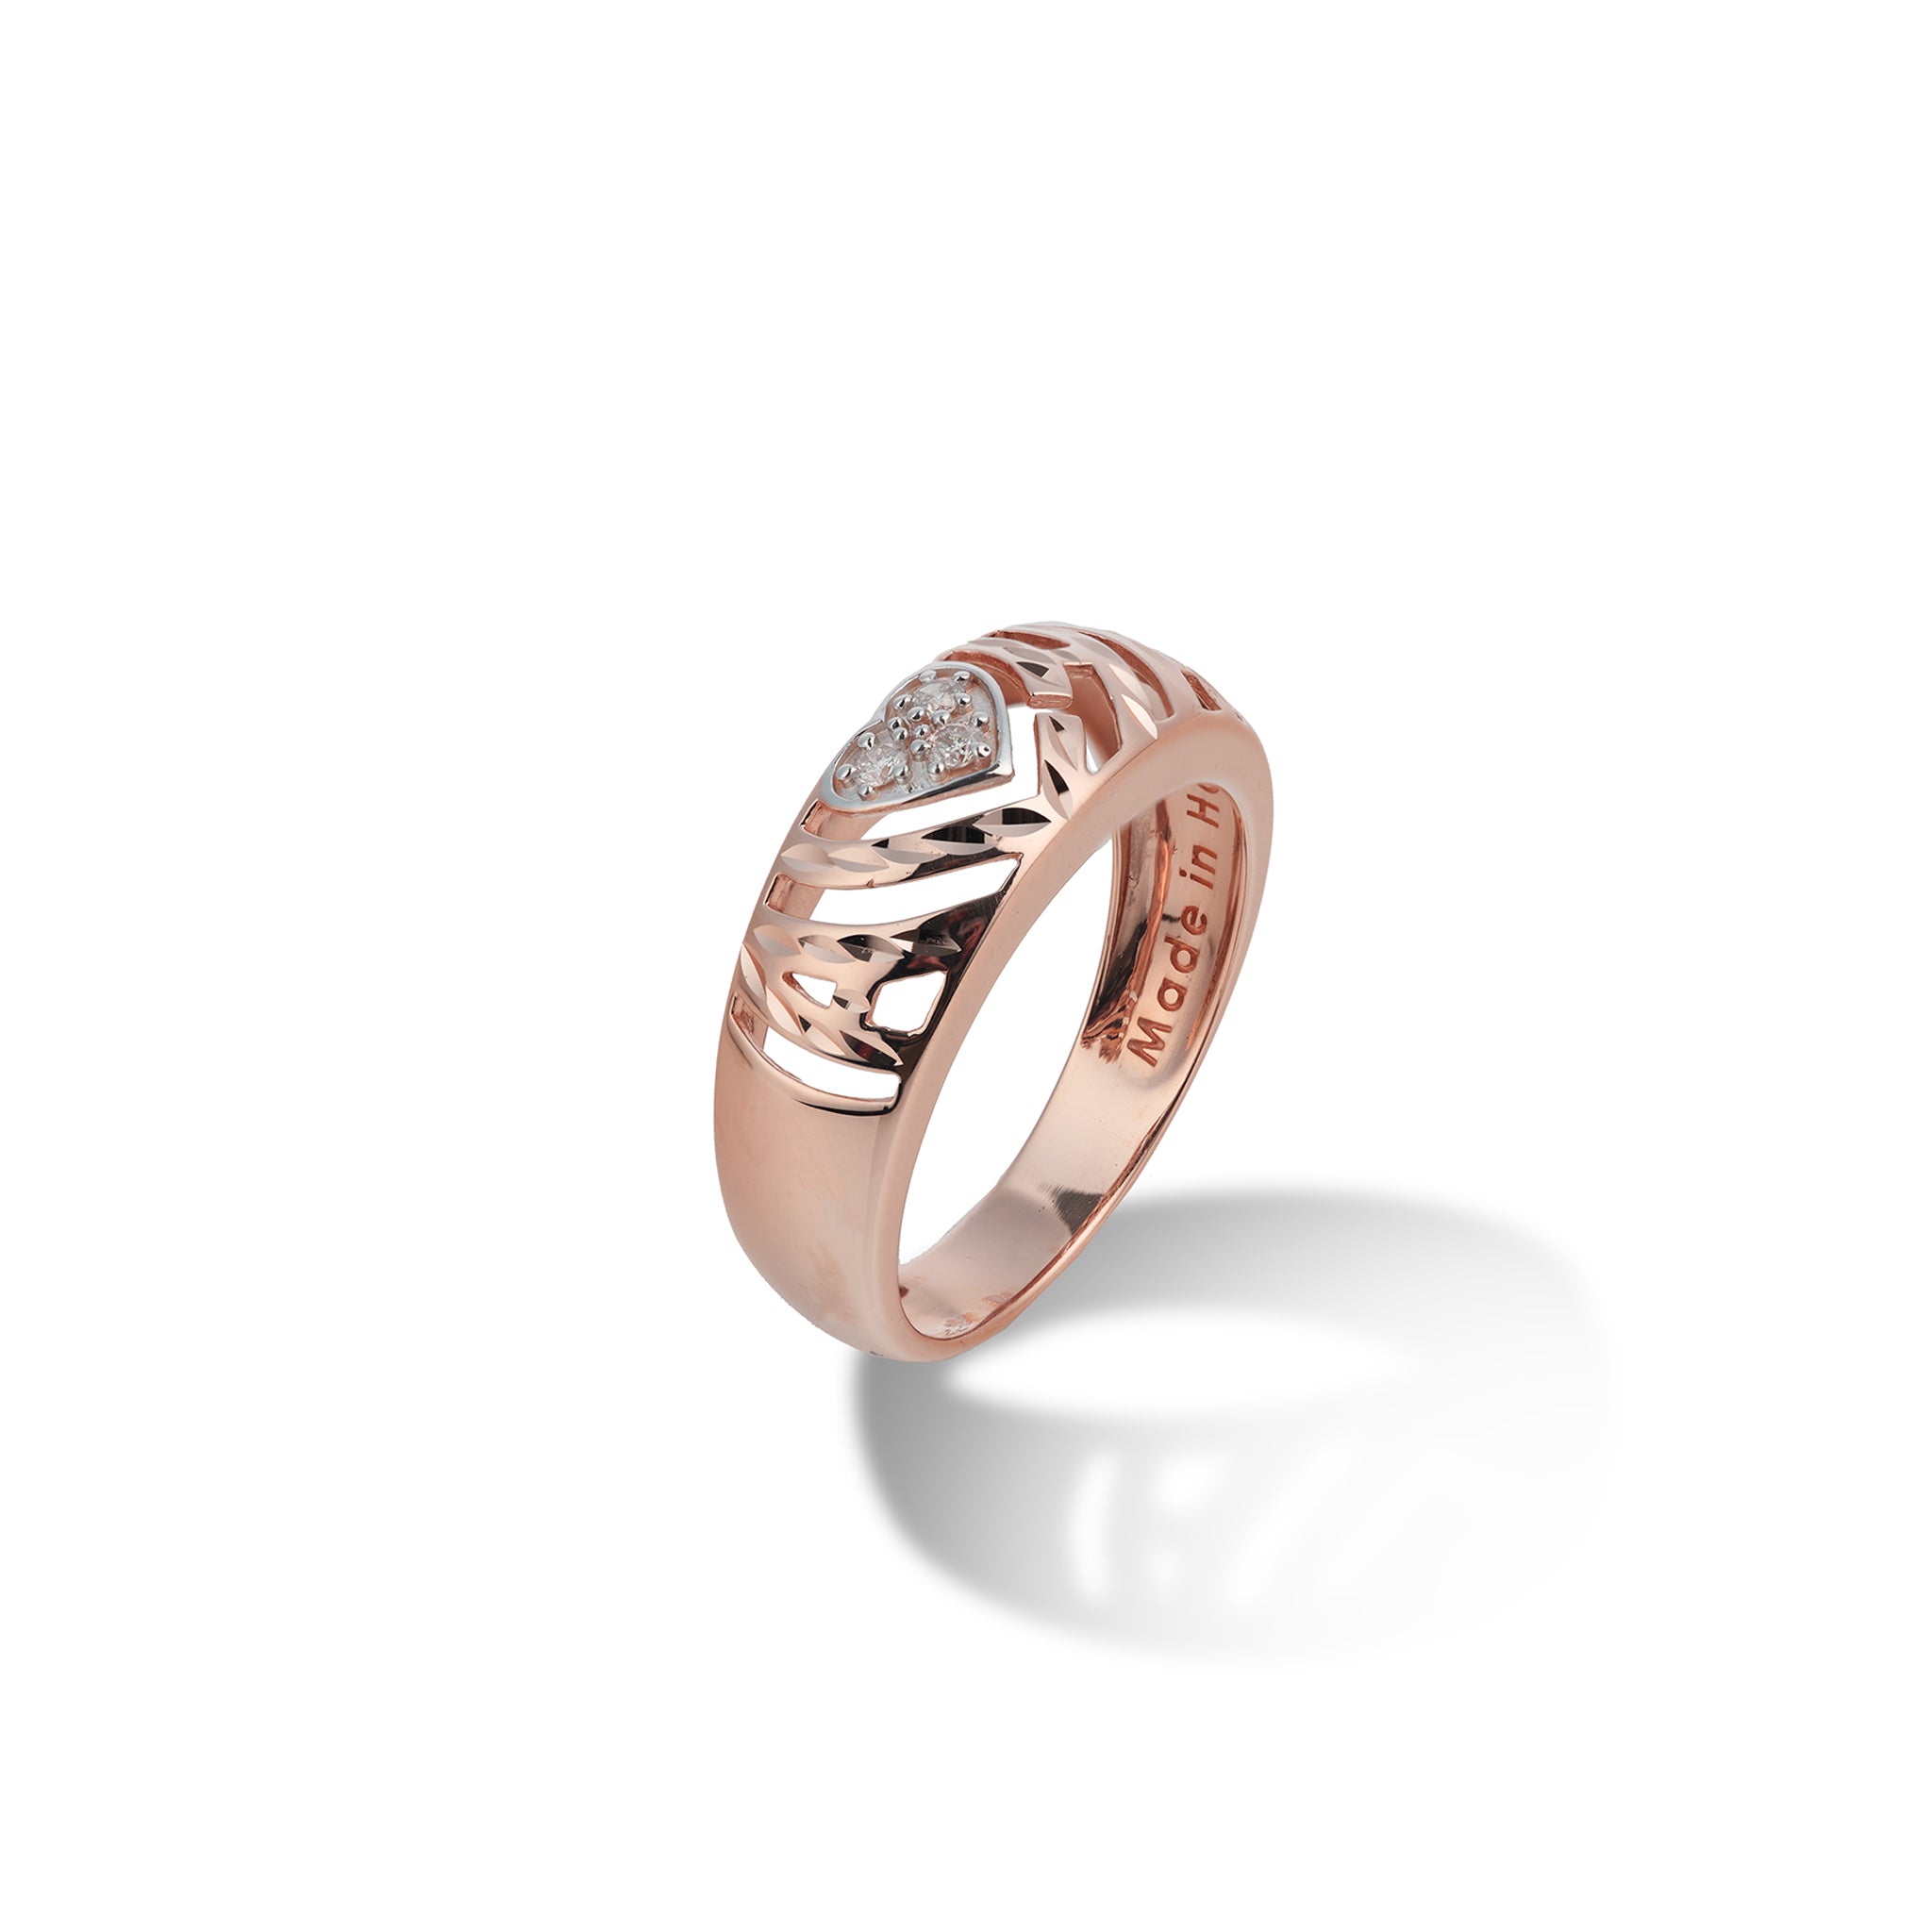 Aloha Heart Ring in Rose Gold with Diamonds - 8mm